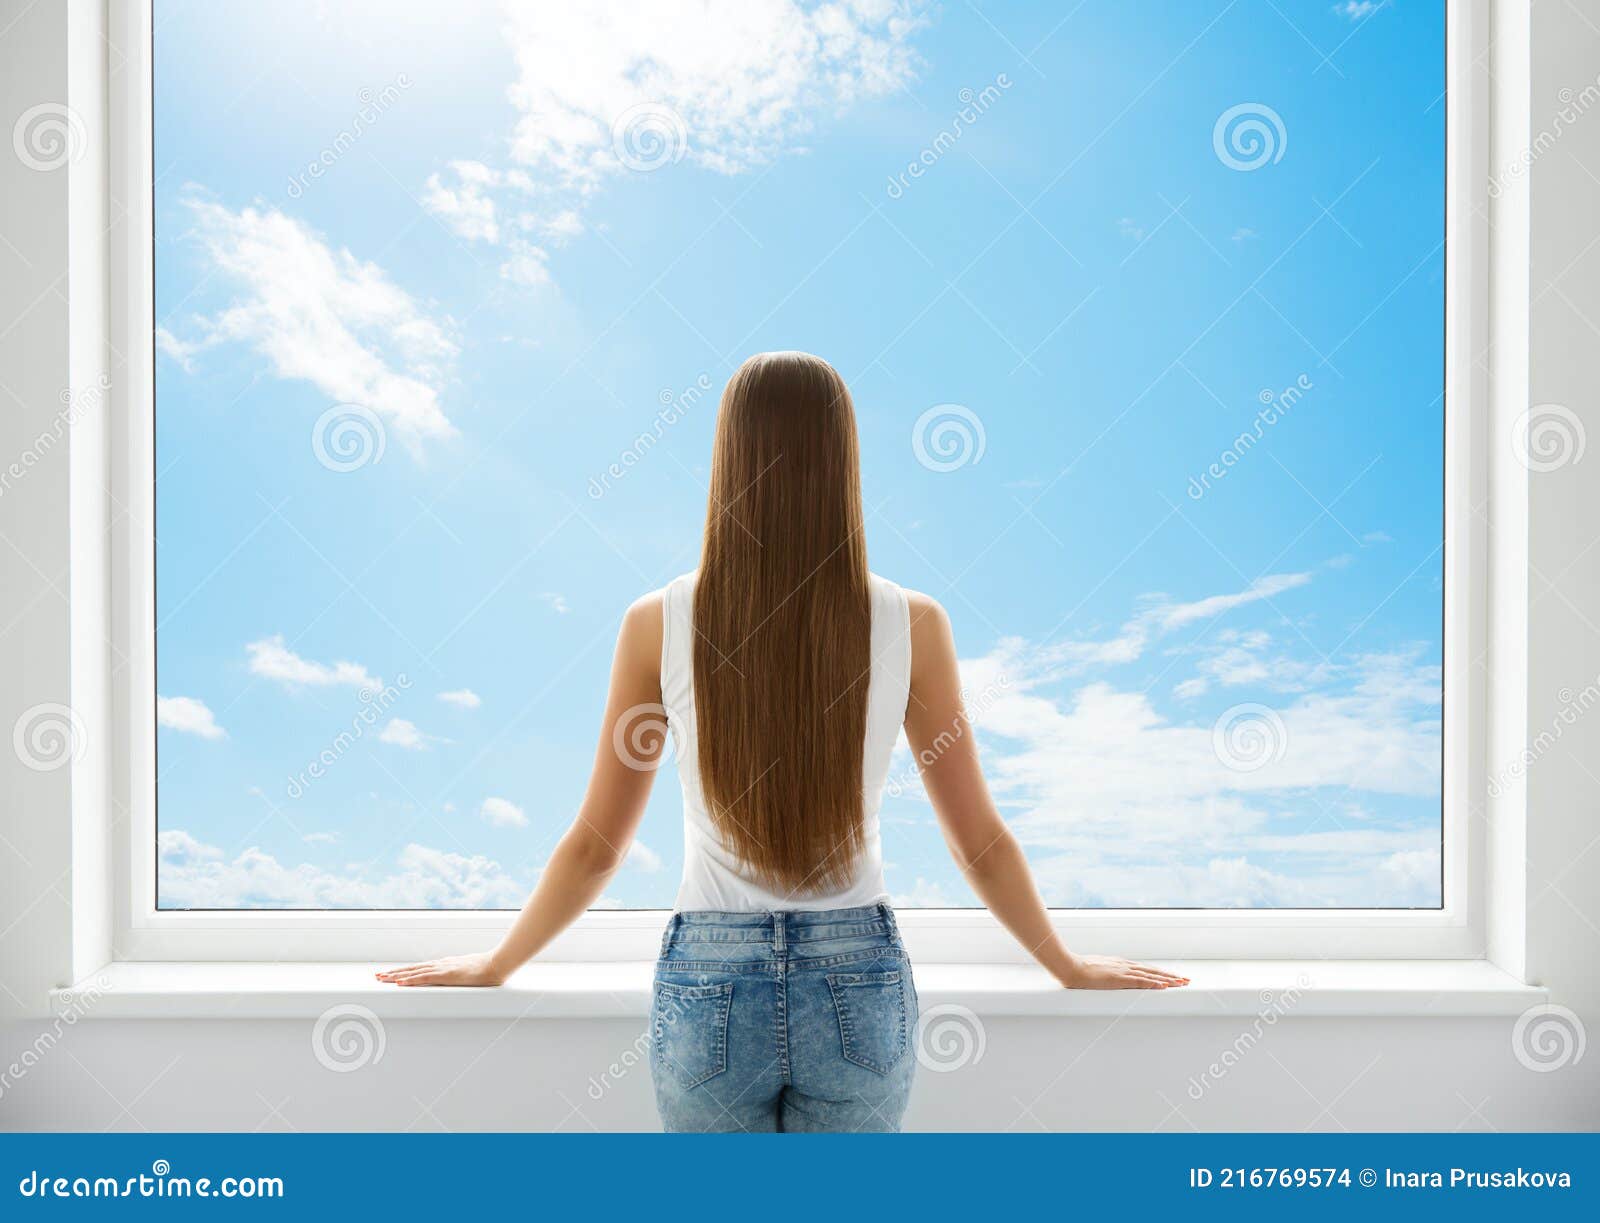 woman rear view looking at window. young girl back side silhouette look forward and thinking. morning wake up woman. sky